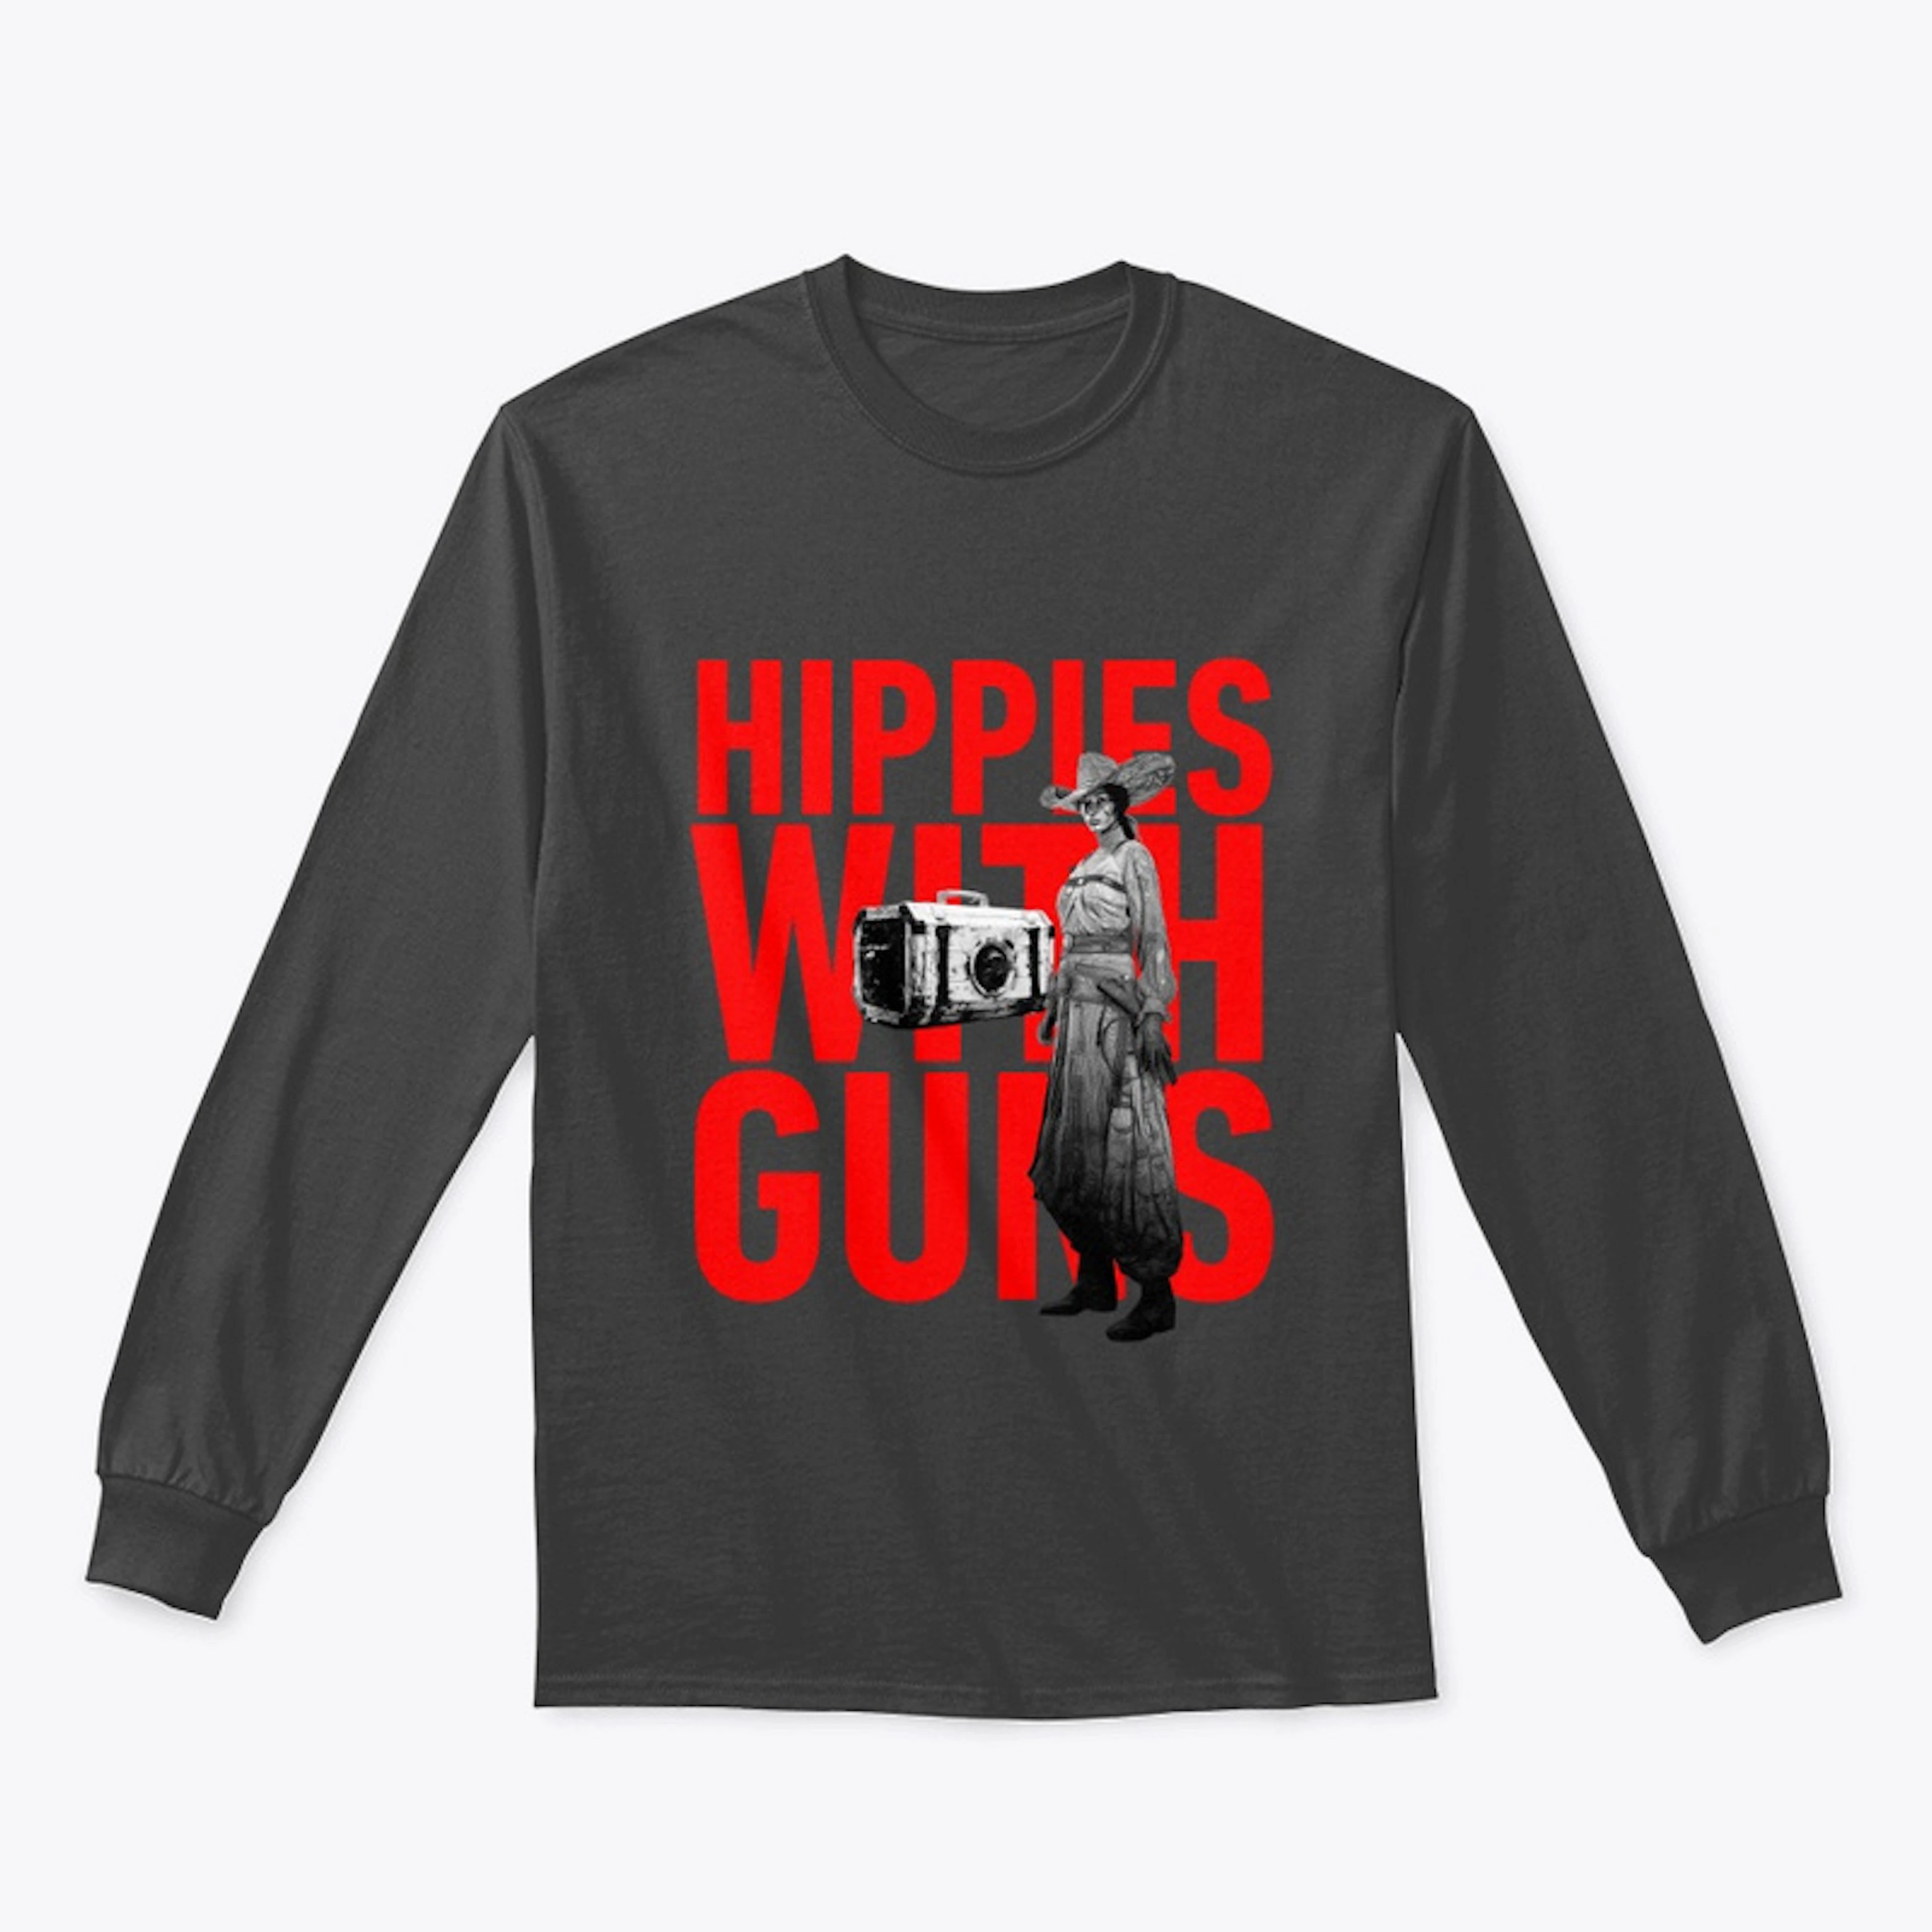 Hippies With Guns